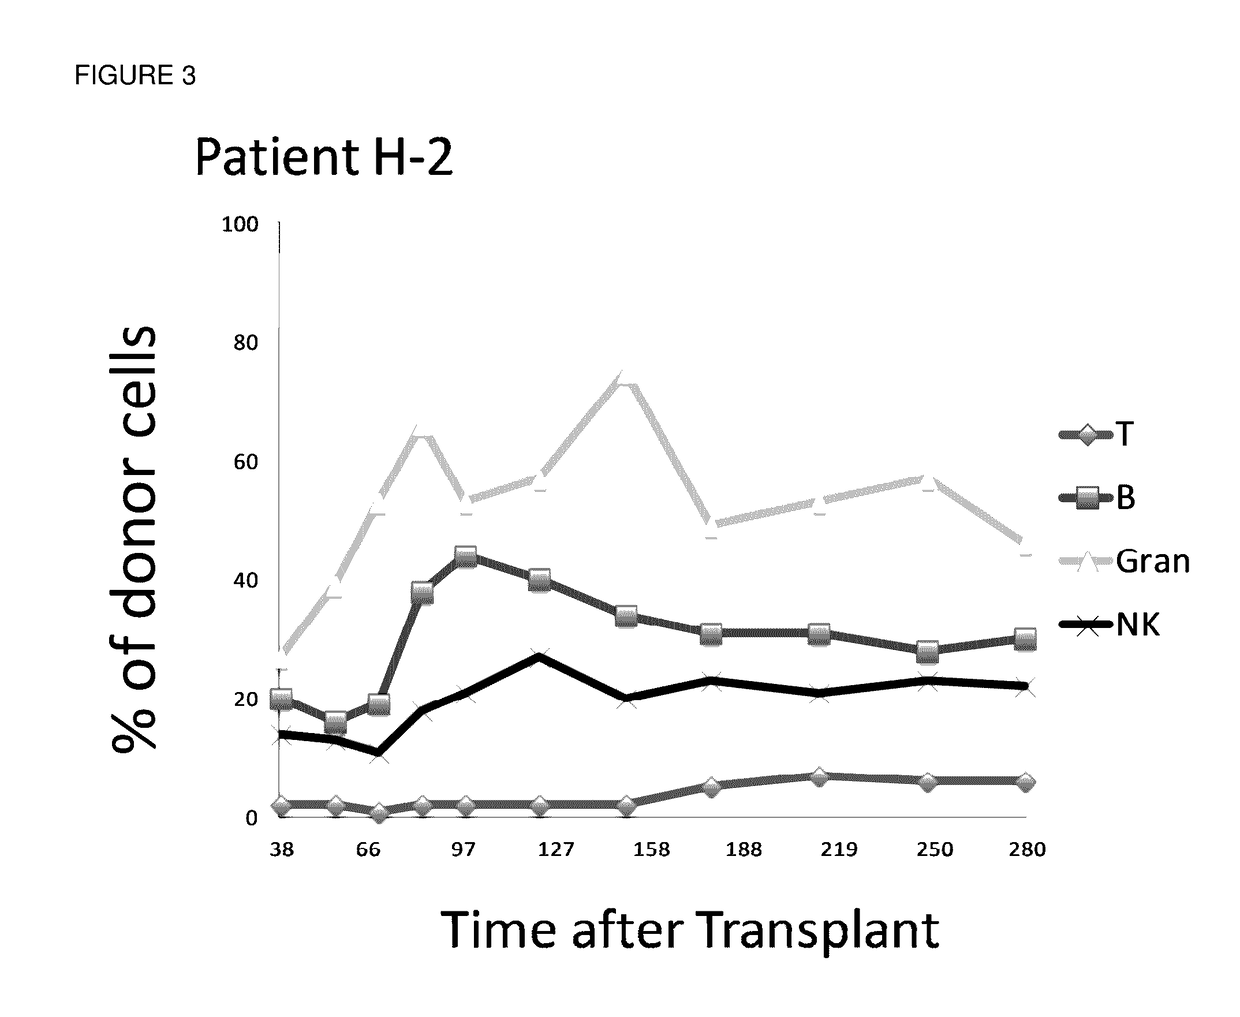 Combined organ and hematopoietic cells for transplantation tolerance of HLA mismatched grafts